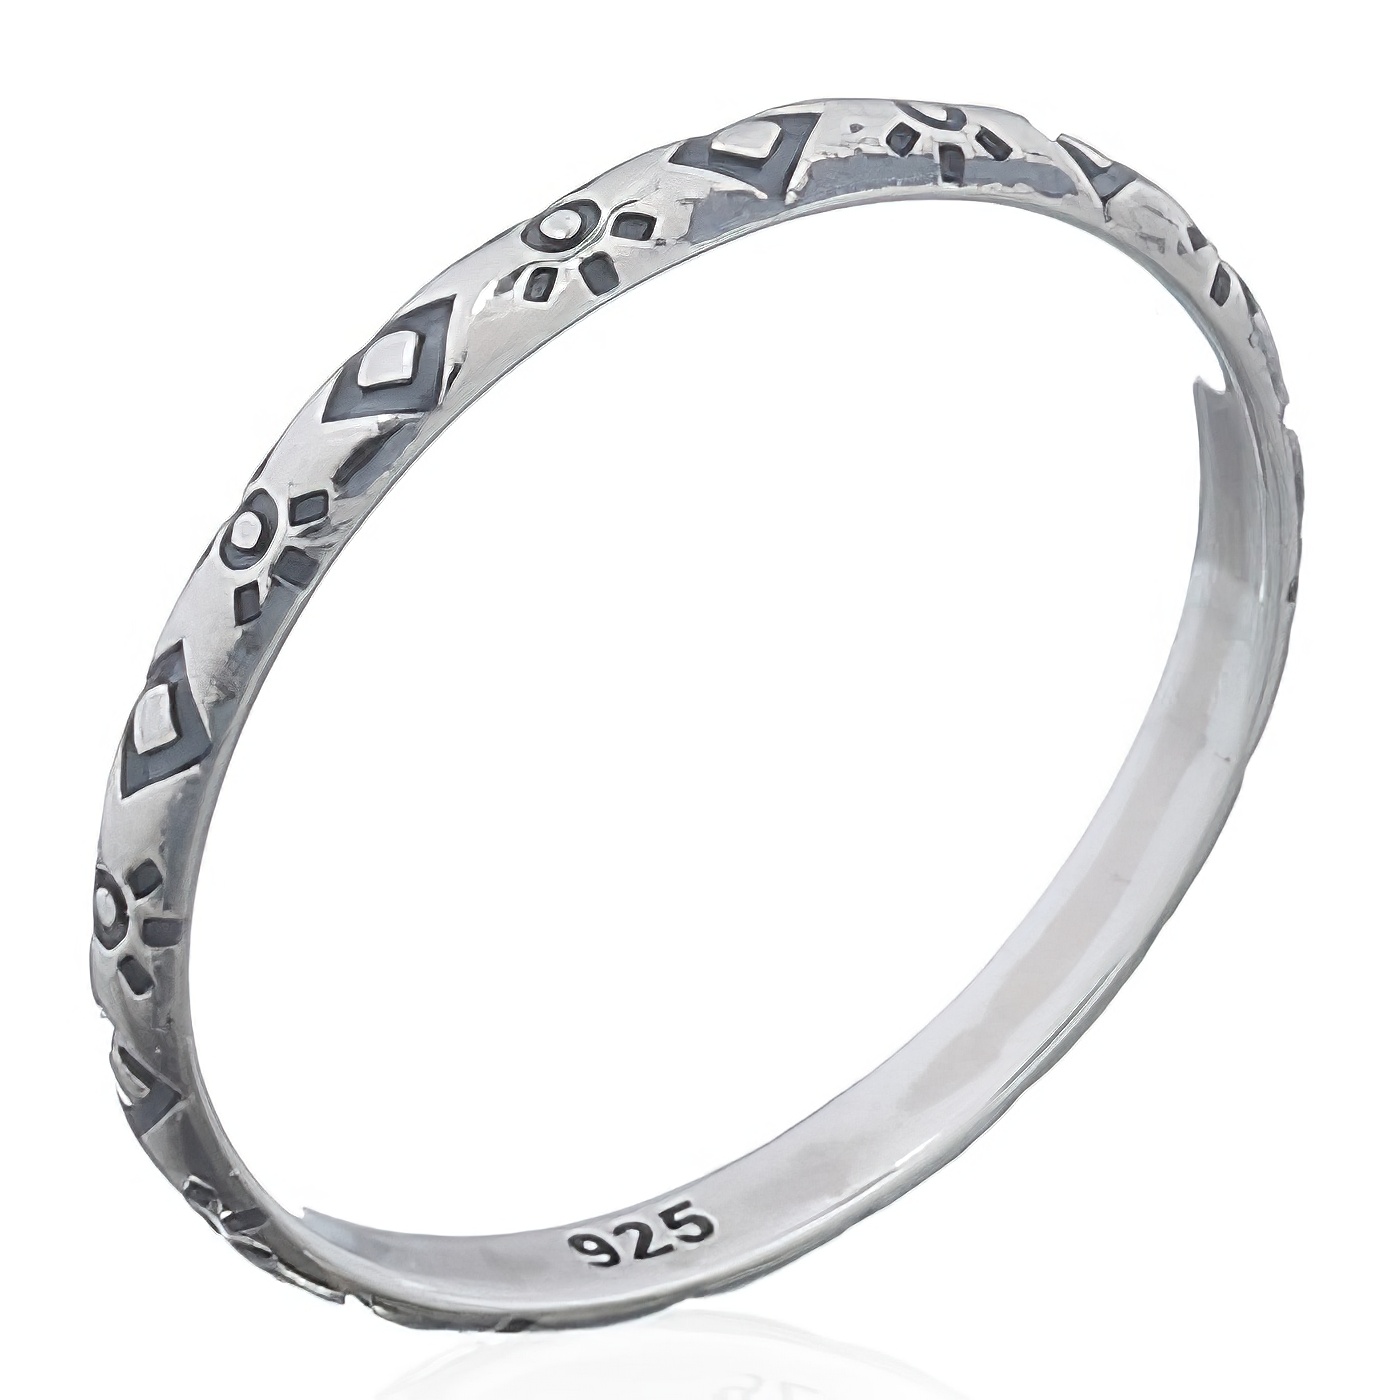 Sun And Diamond Surrounded On Sterling Silver Ring by BeYindi 